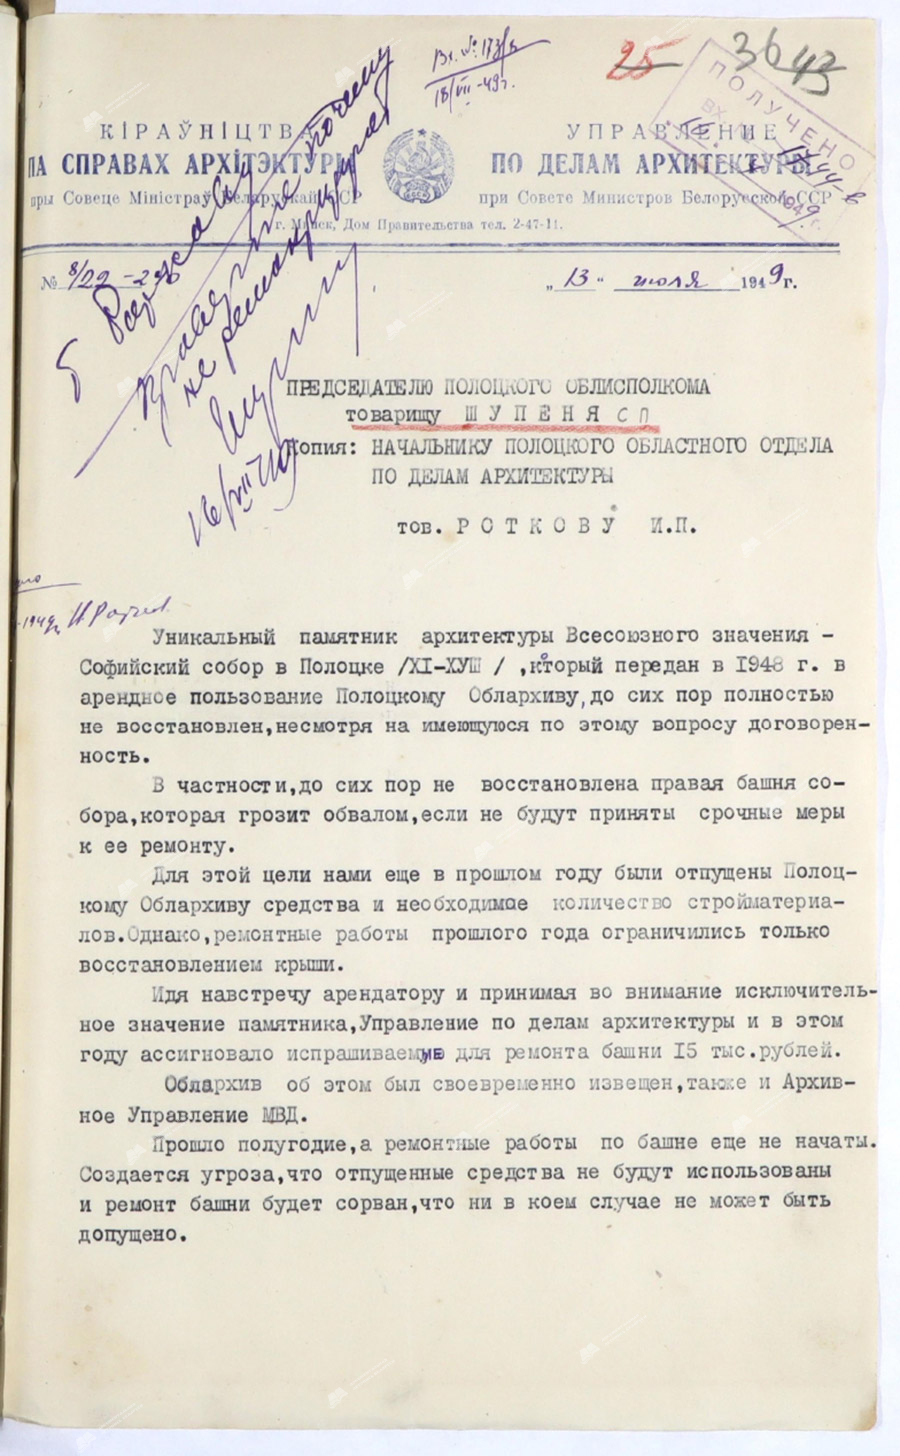 Letter from the deputy. Head of the Directorate for Architectural Affairs under the Council of Ministers of the BSSR on July 13, 1949 on the issue of repairing the St. Sophia Cathedral in Polotsk-стр. 0